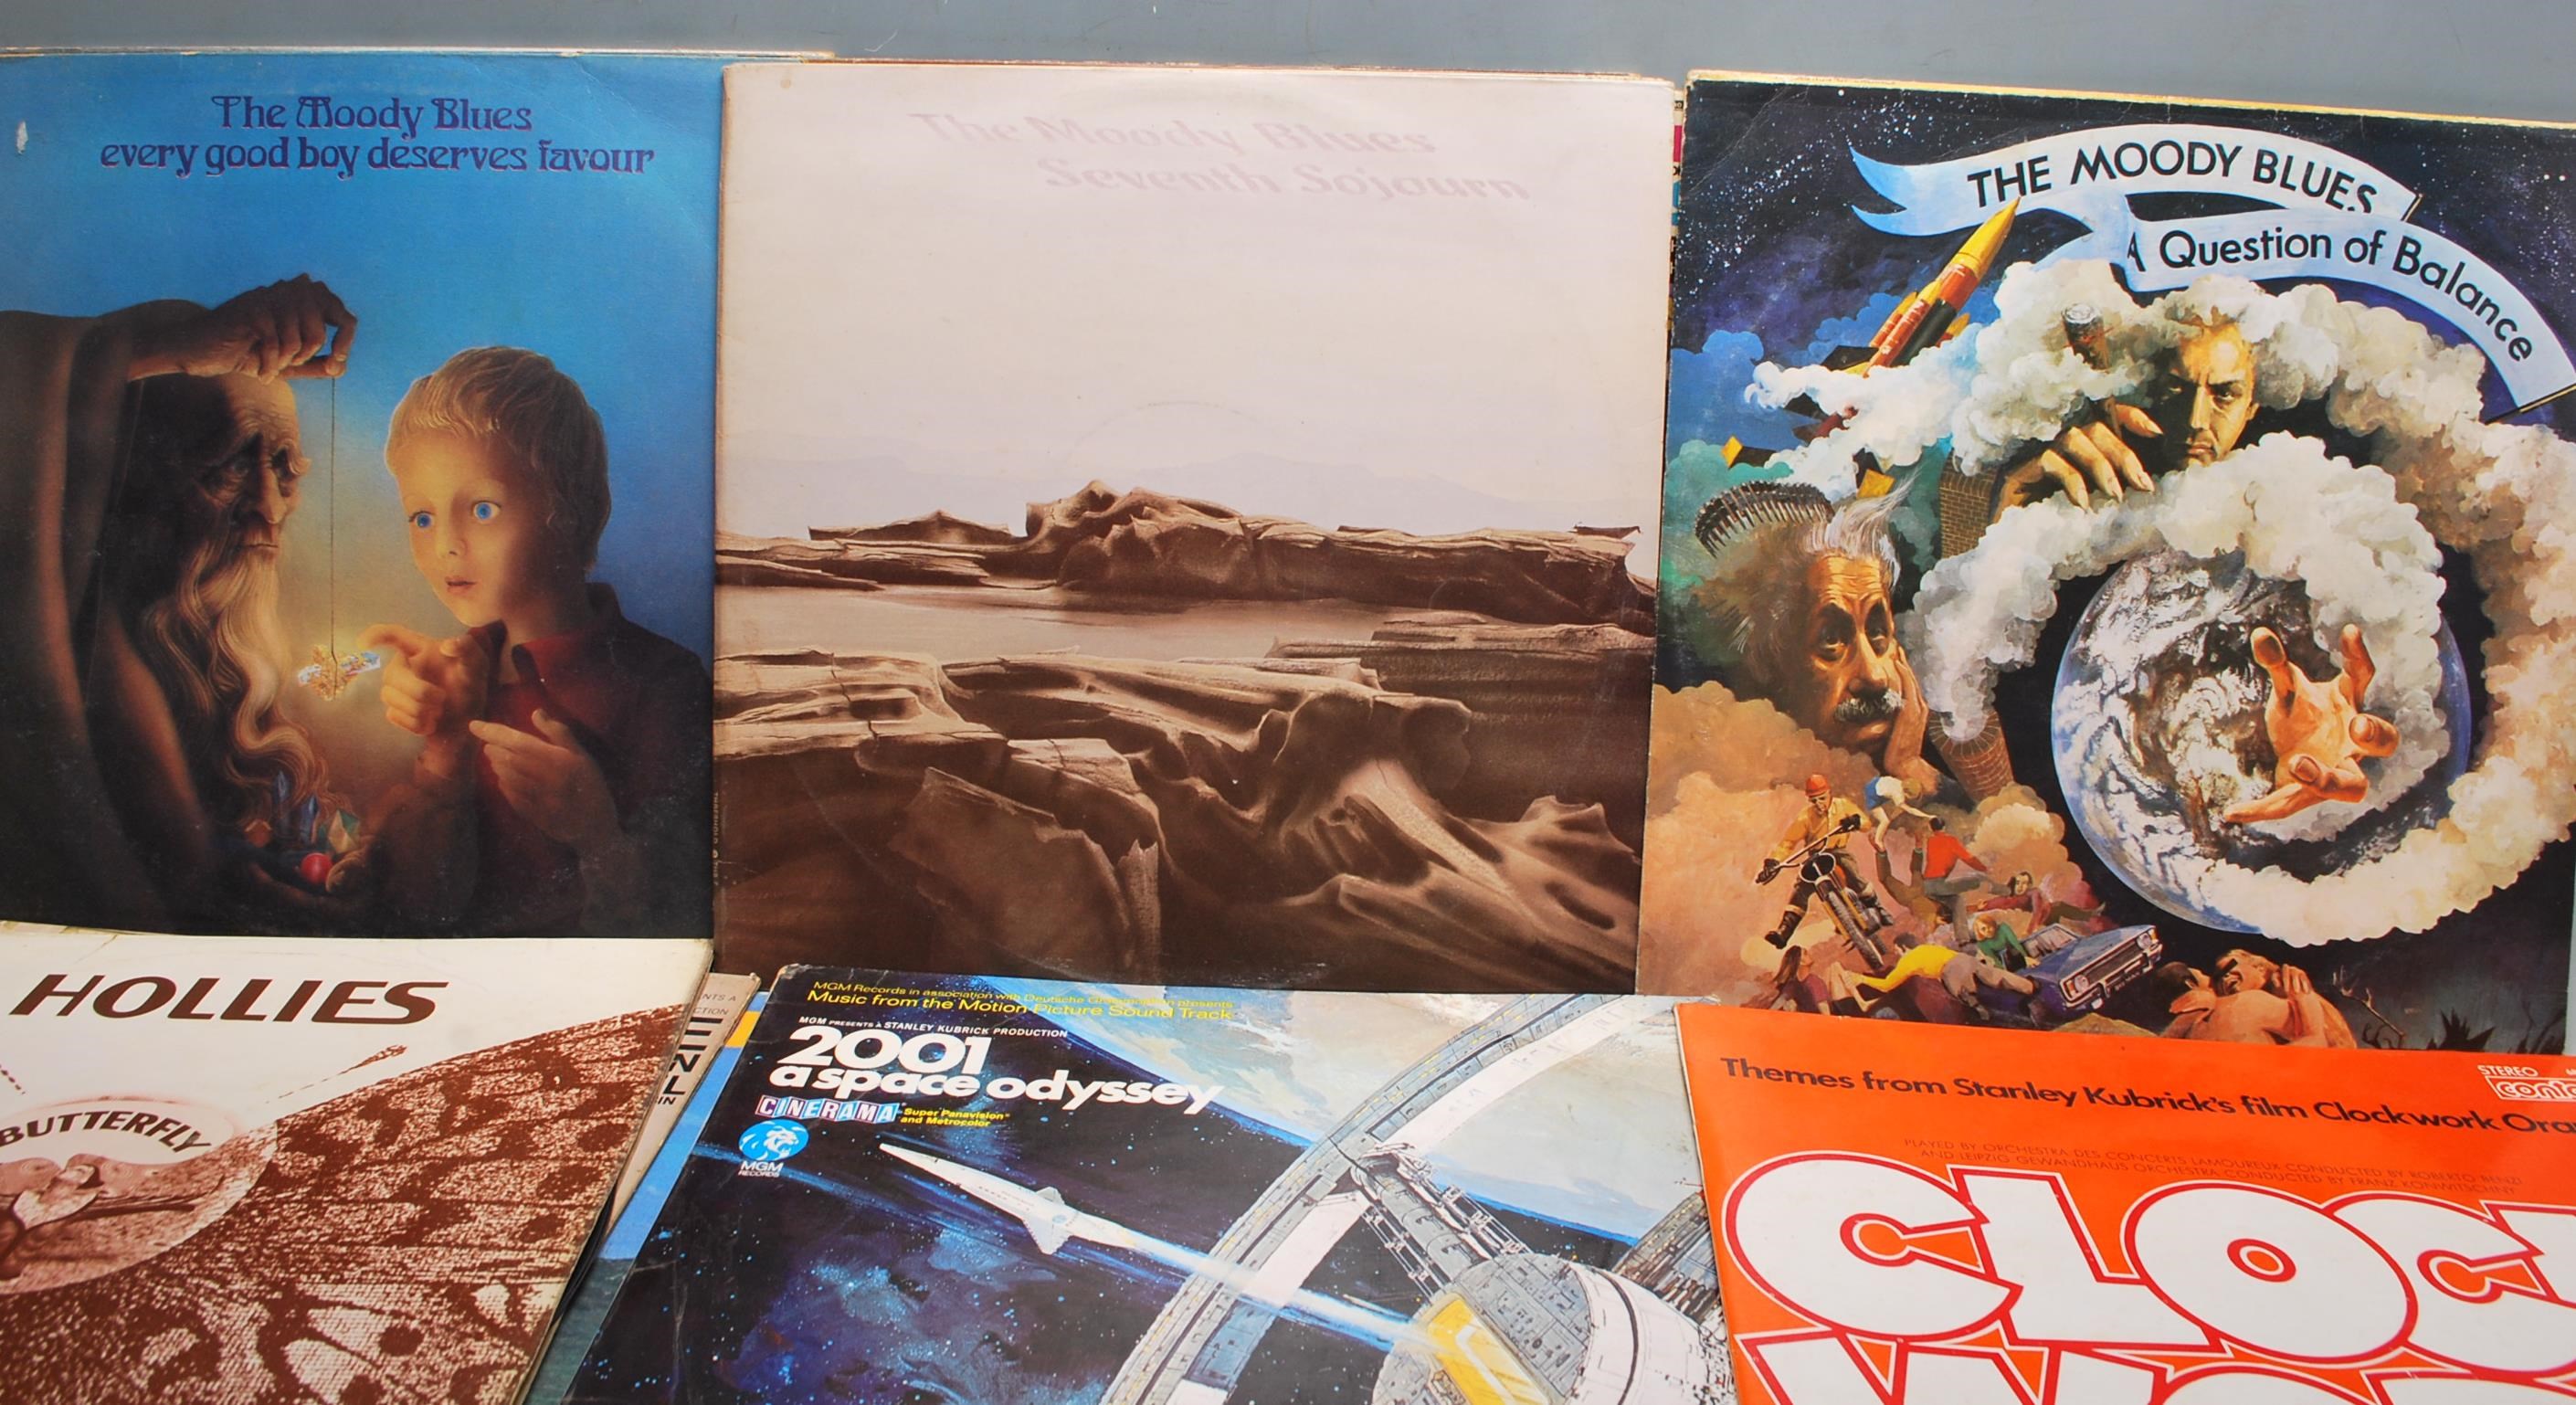 COLLECTION OF VINTAGE VINYL RECORDS - MOODY BLUES, CREAM ETC - Image 2 of 7